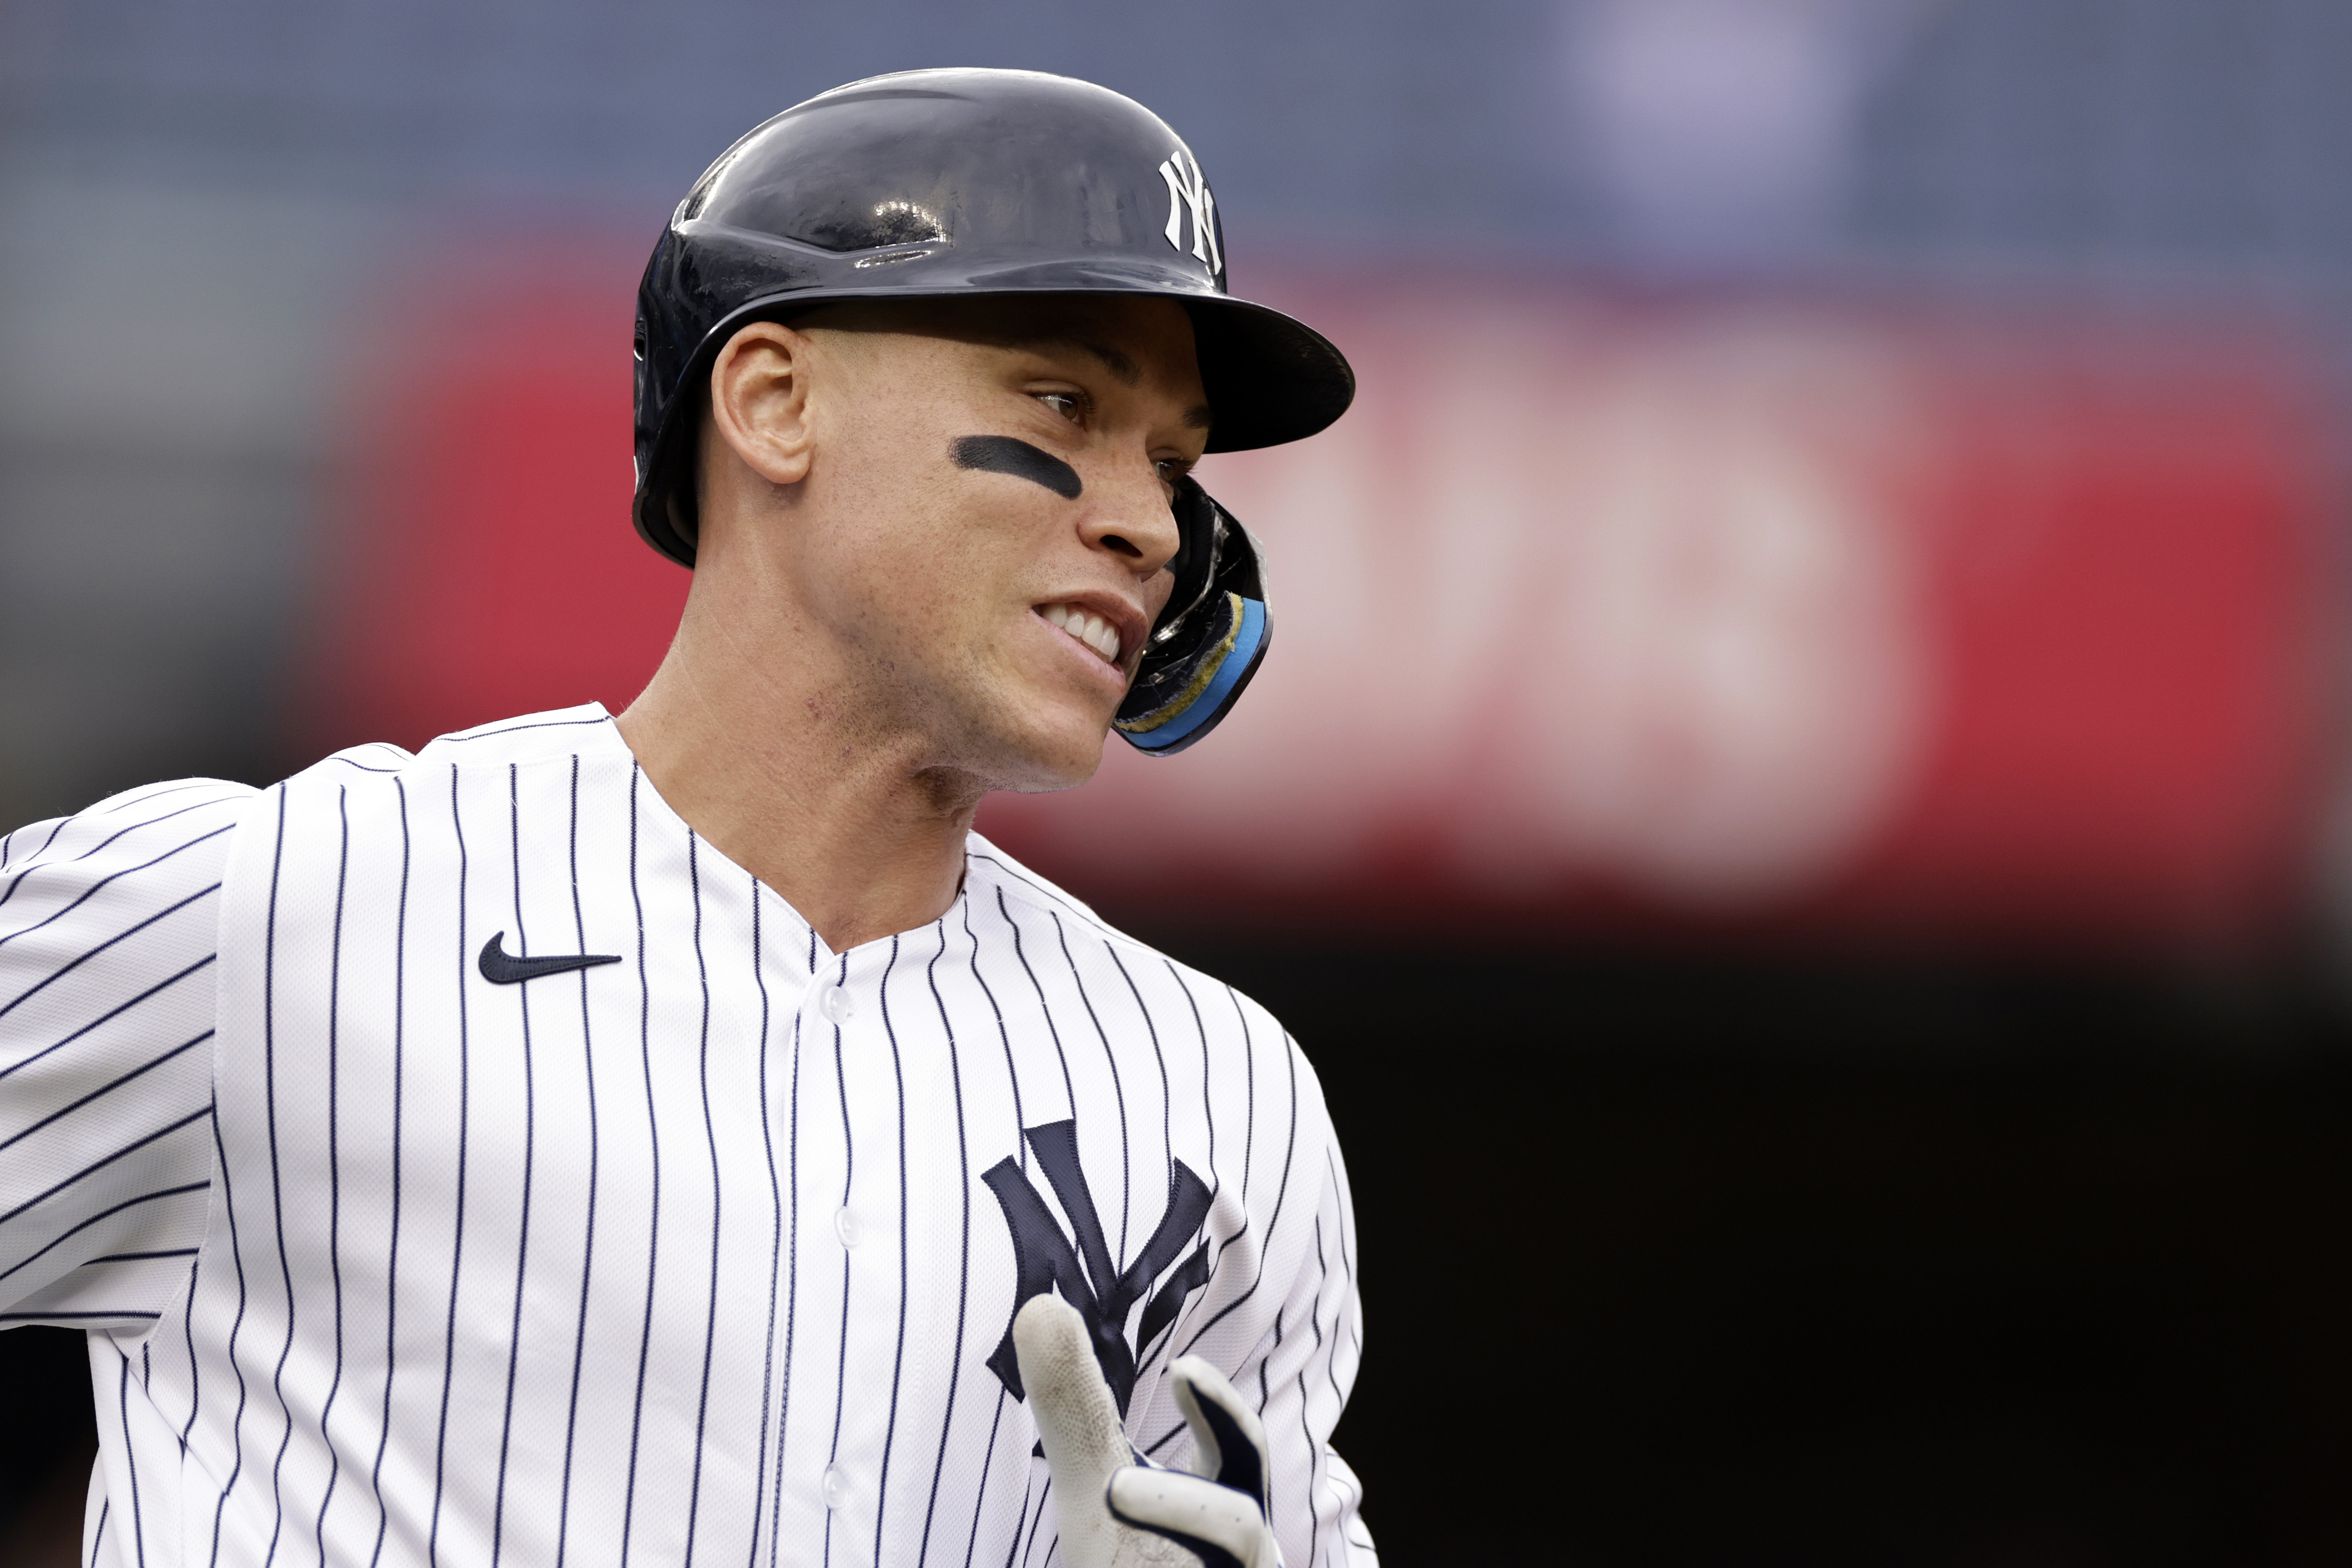 Judge hits 55th homer, Yanks mark for right-handed hitters